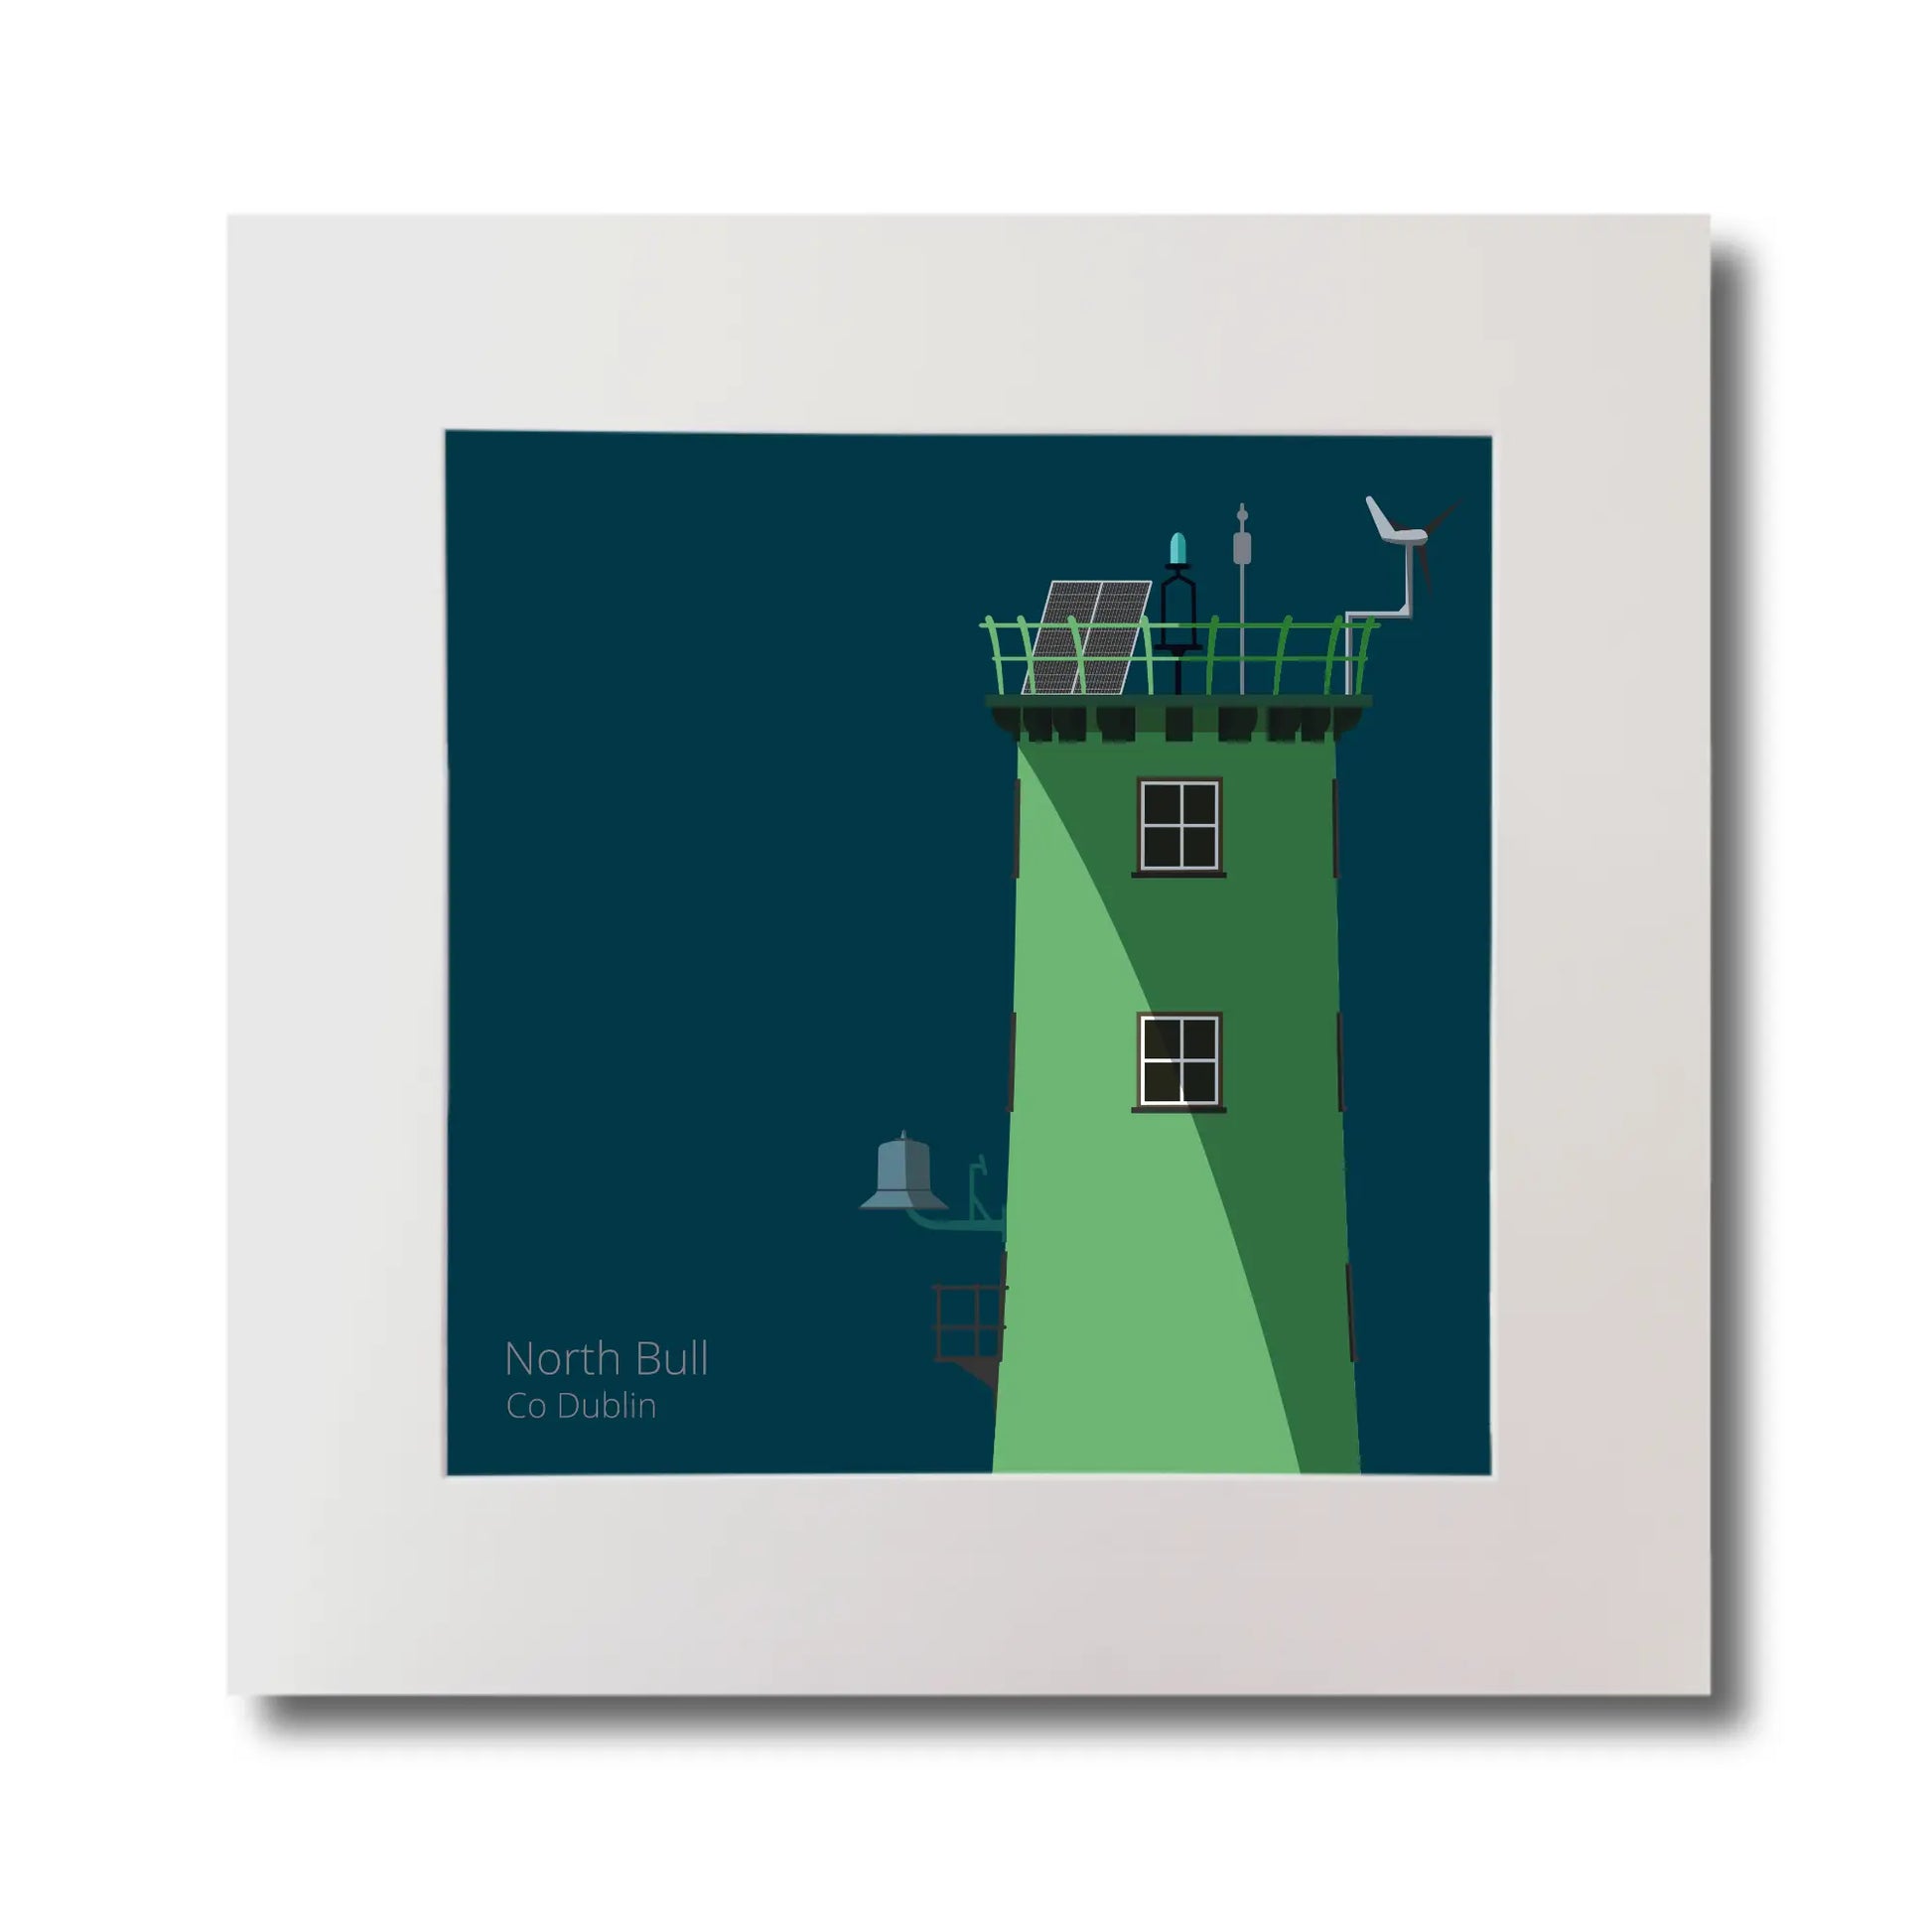 Illustration of North Bull lighthouse on a midnight blue background, mounted and measuring 30x30cm.